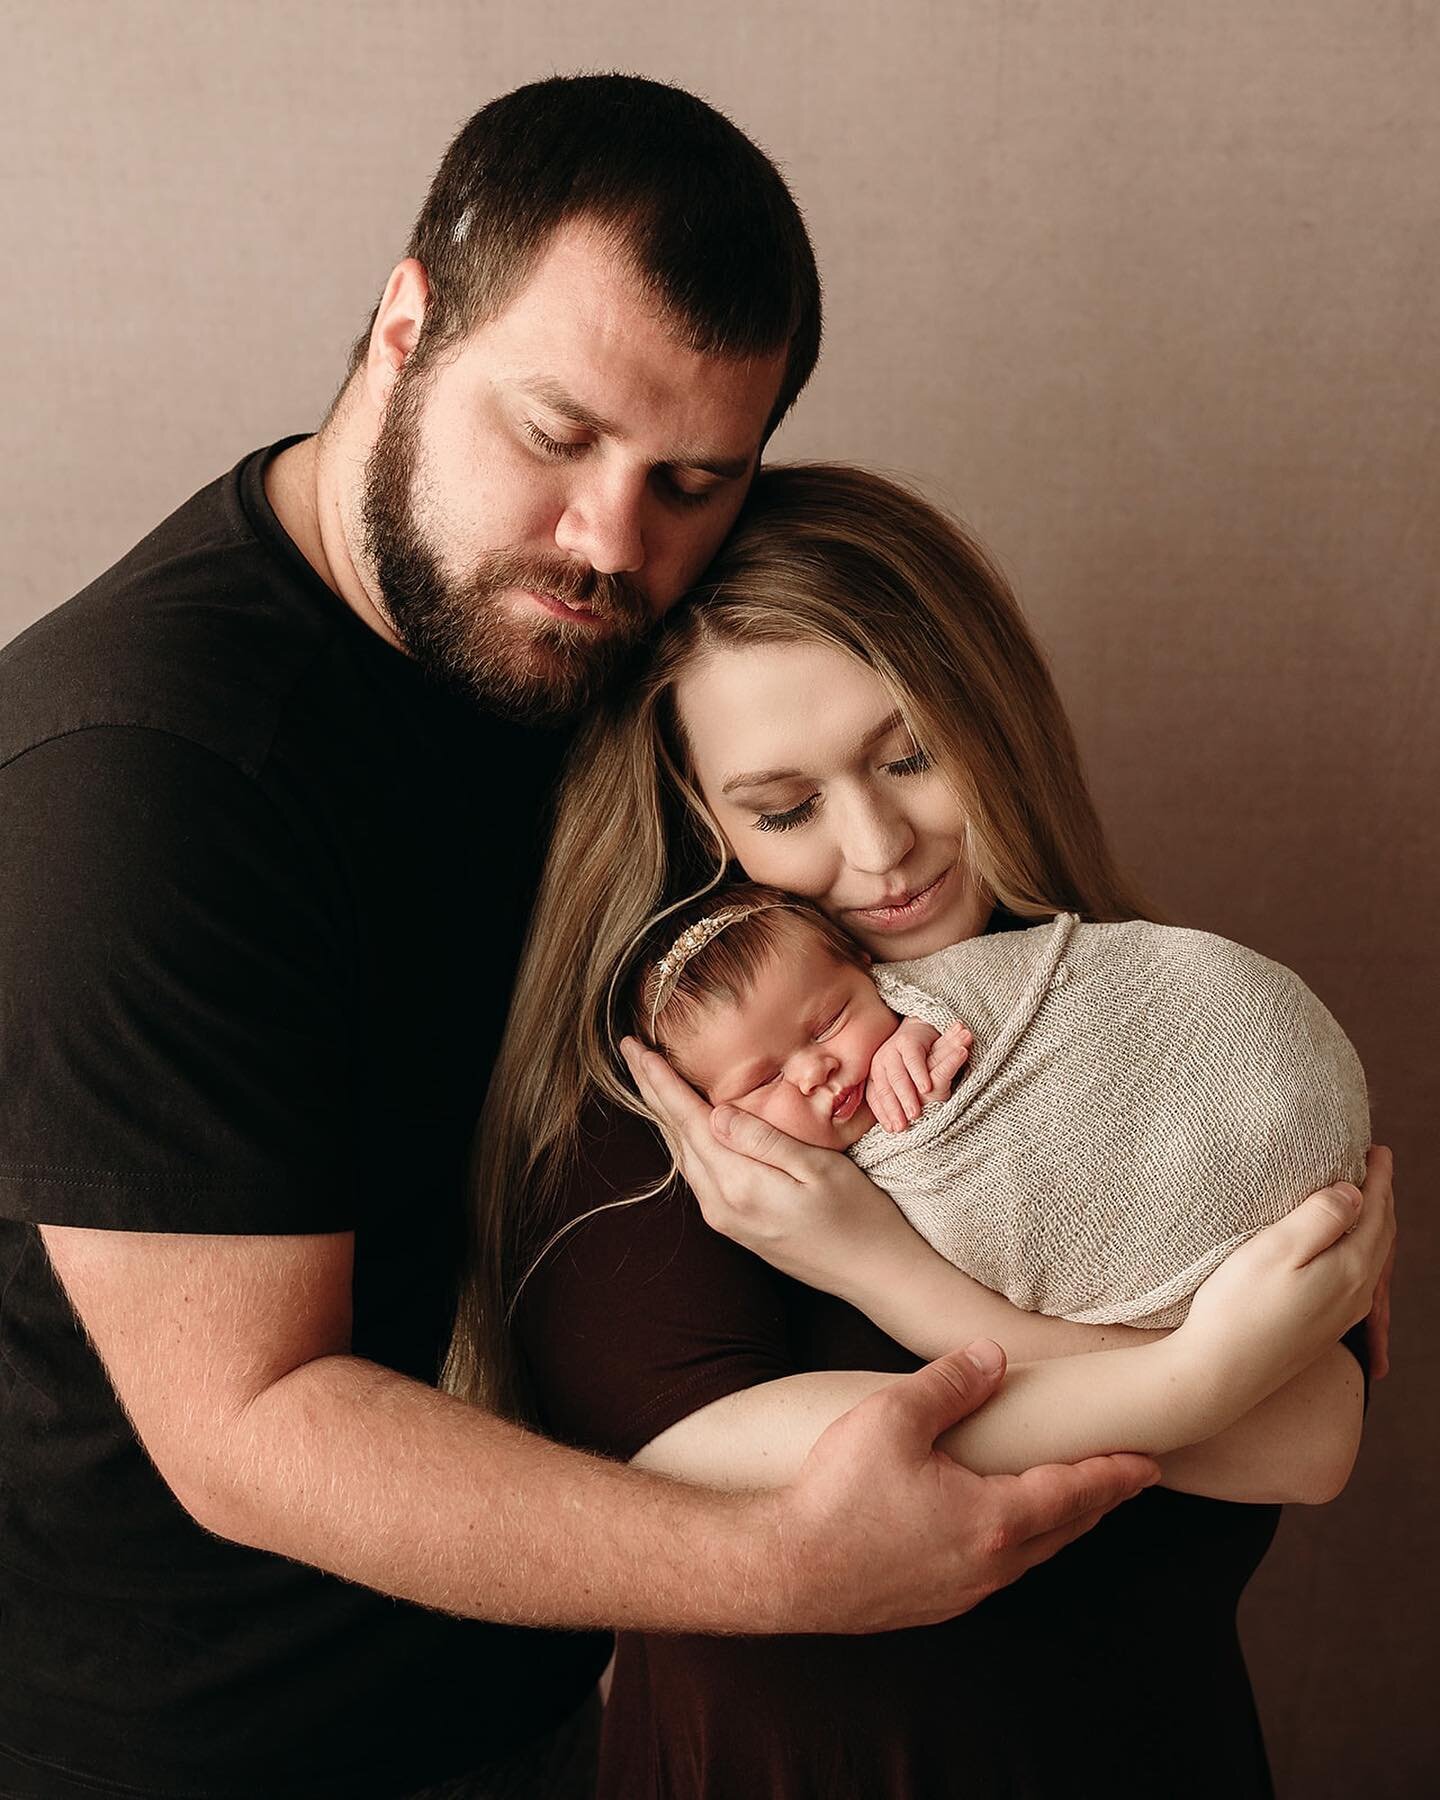 What a sweet little family. 💕

✨NOW BOOKING FOR ALL OF 2022✨

* February - 1 spot
* March - 1 spot
* April - 1 spot
* May - 1 spot in the beginning to middle of the month
* June - 1 spot
* July - 1 spot

⬇️⬇️⬇️⬇️⬇️⬇️⬇️⬇️⬇️
www.haleybphoto.com

Tie b